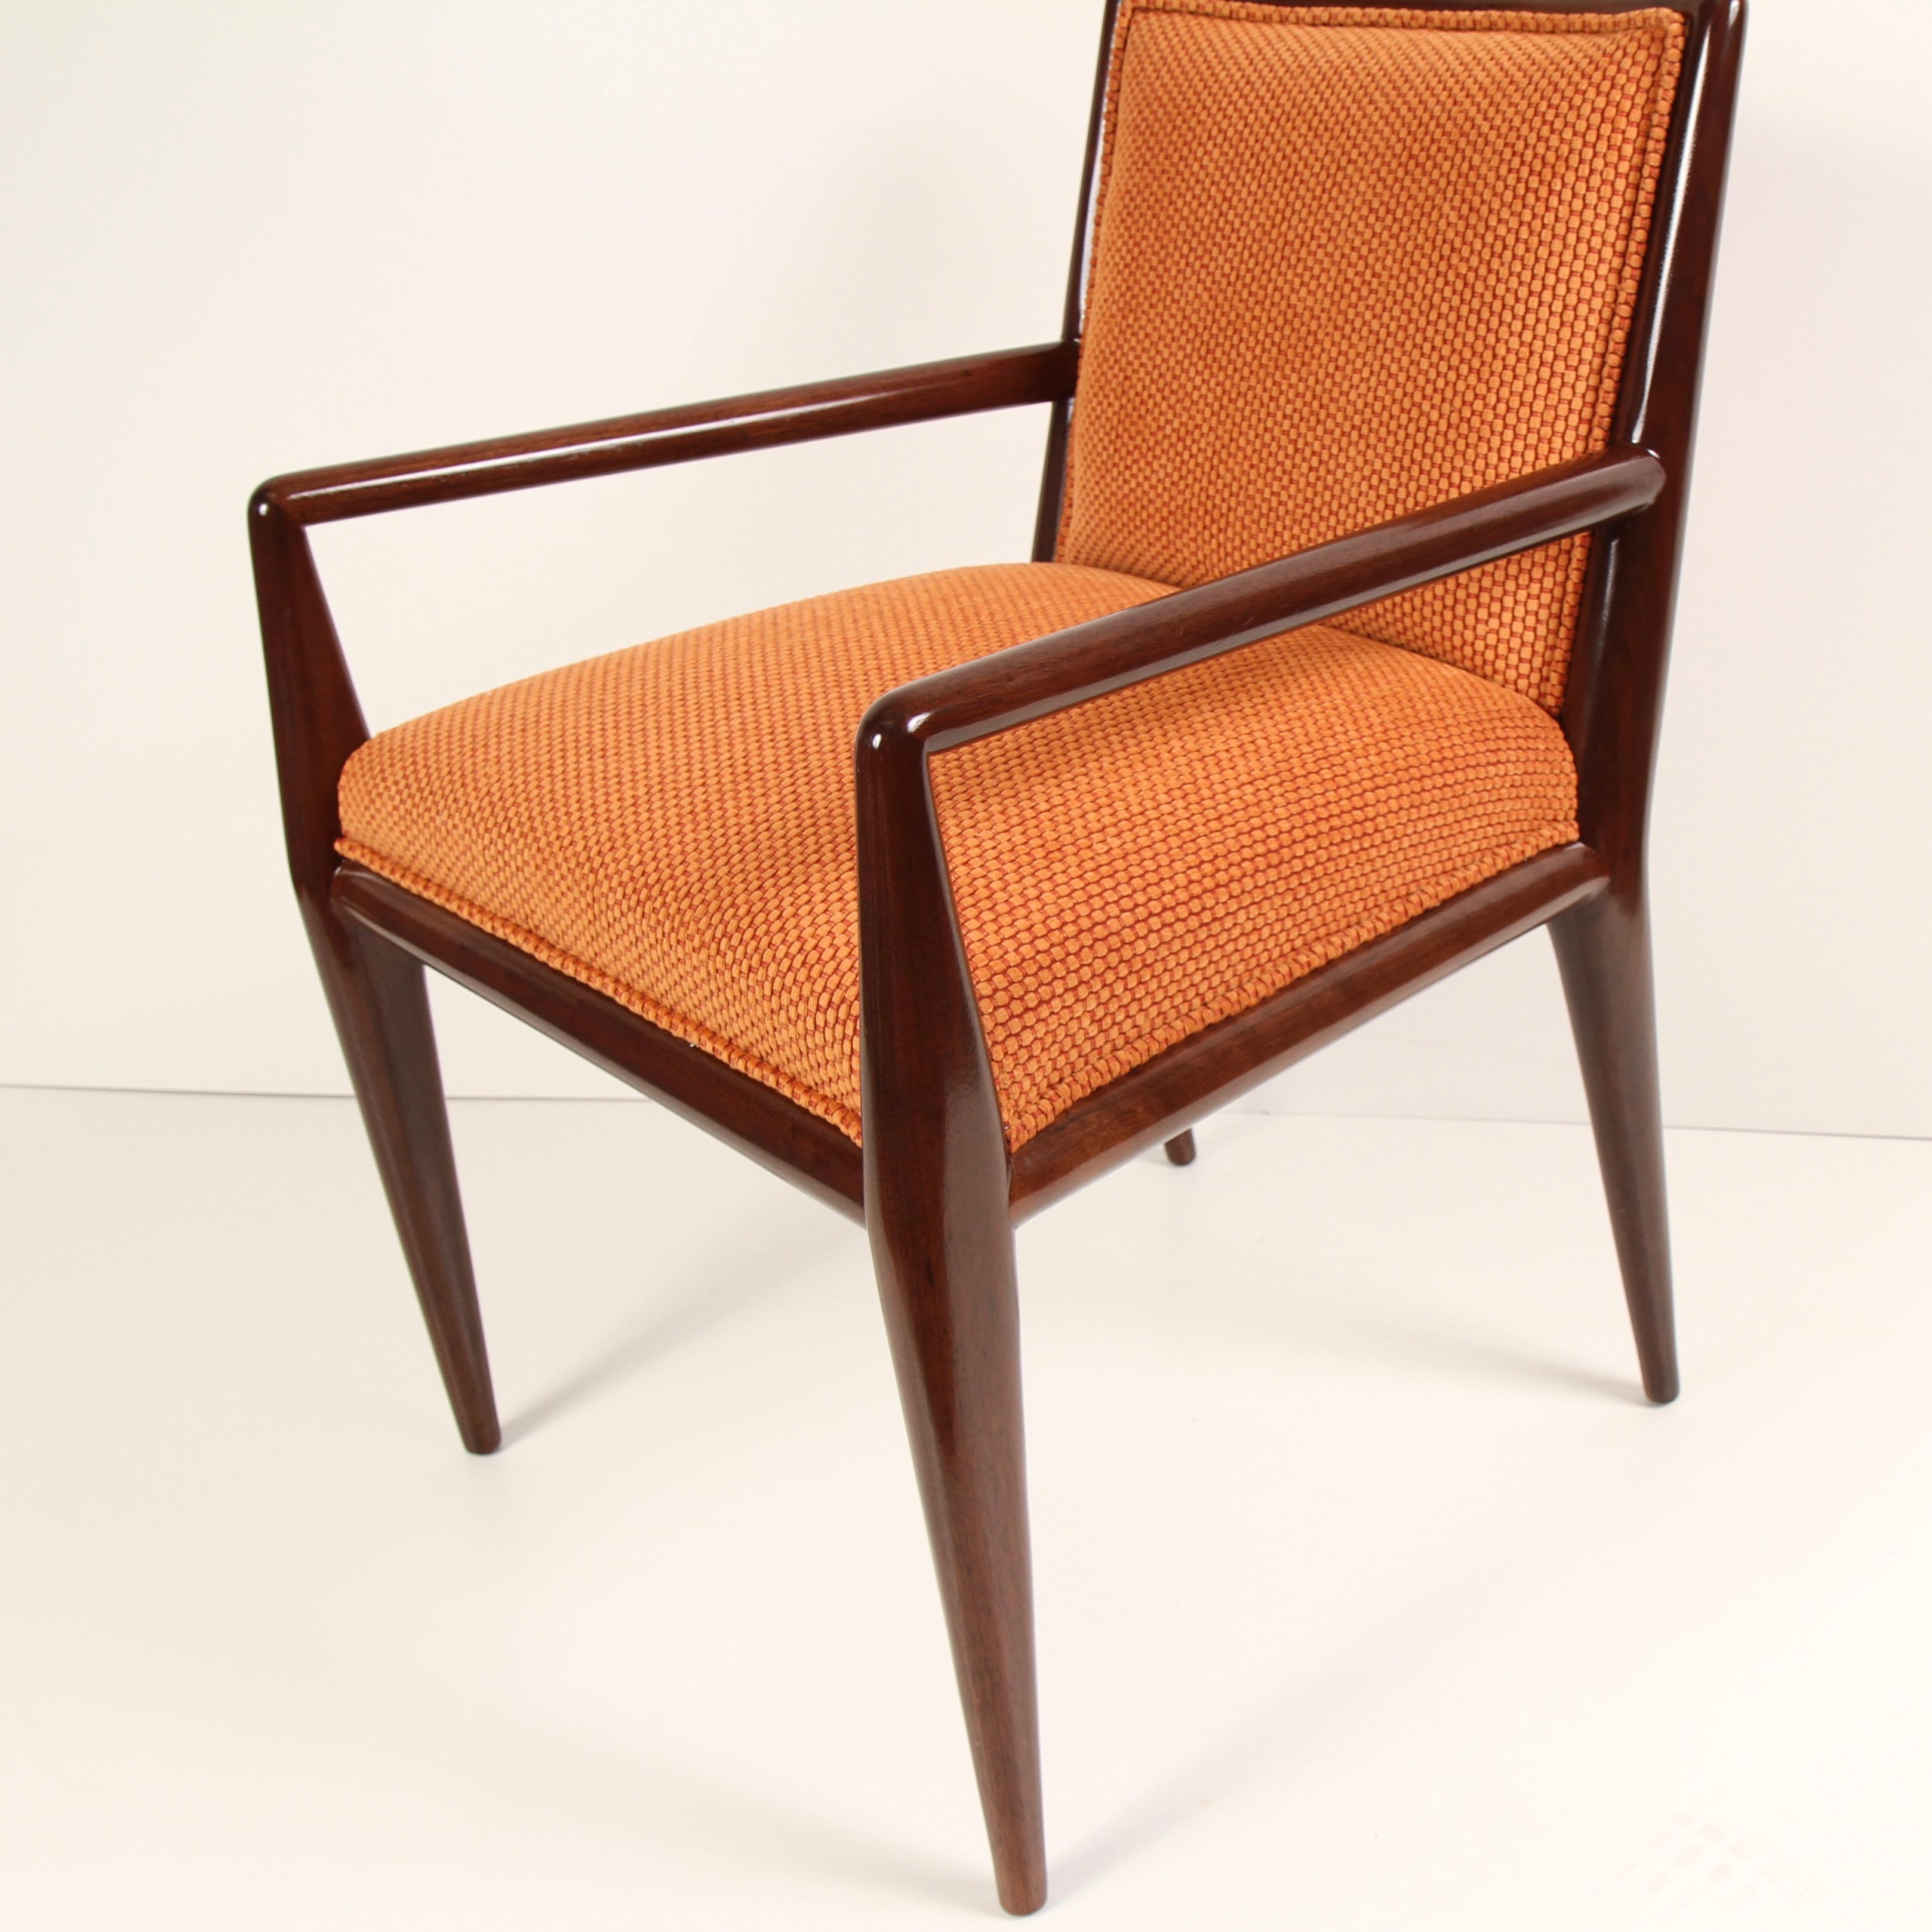 Classic midcentury armchair by T.H. Robsjohn-Gibbings for Widdicomb. Newly refinished and reupholstered in a contemporary, burnt-orange textured fabric.